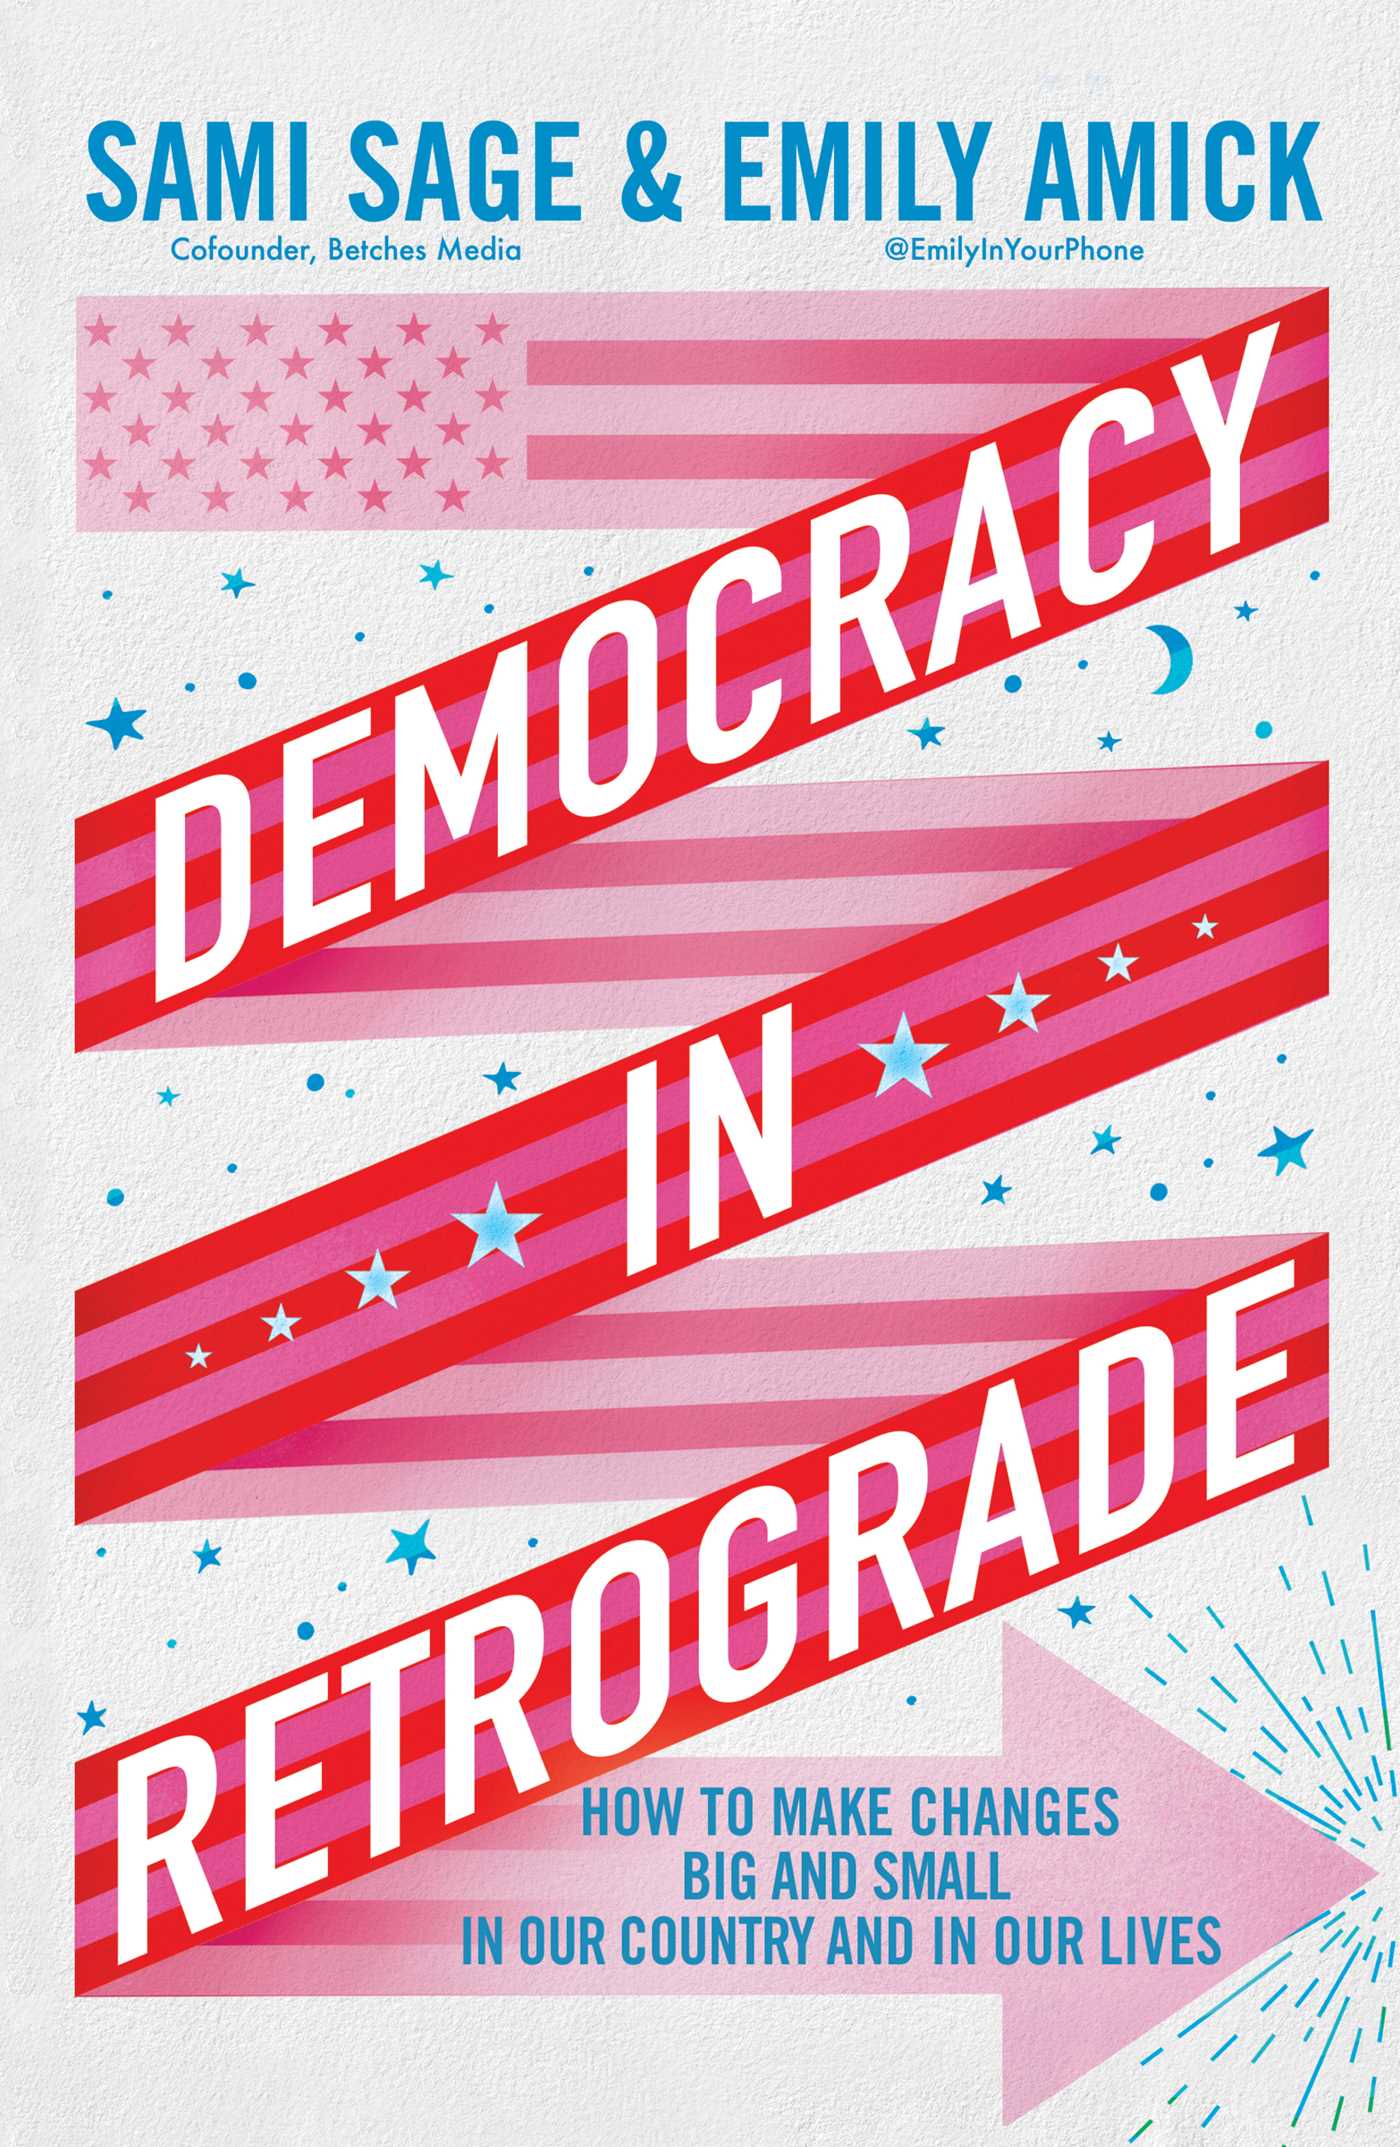 Book Launch: Democracy in Retrograde by Sami Sage and Emily Amick